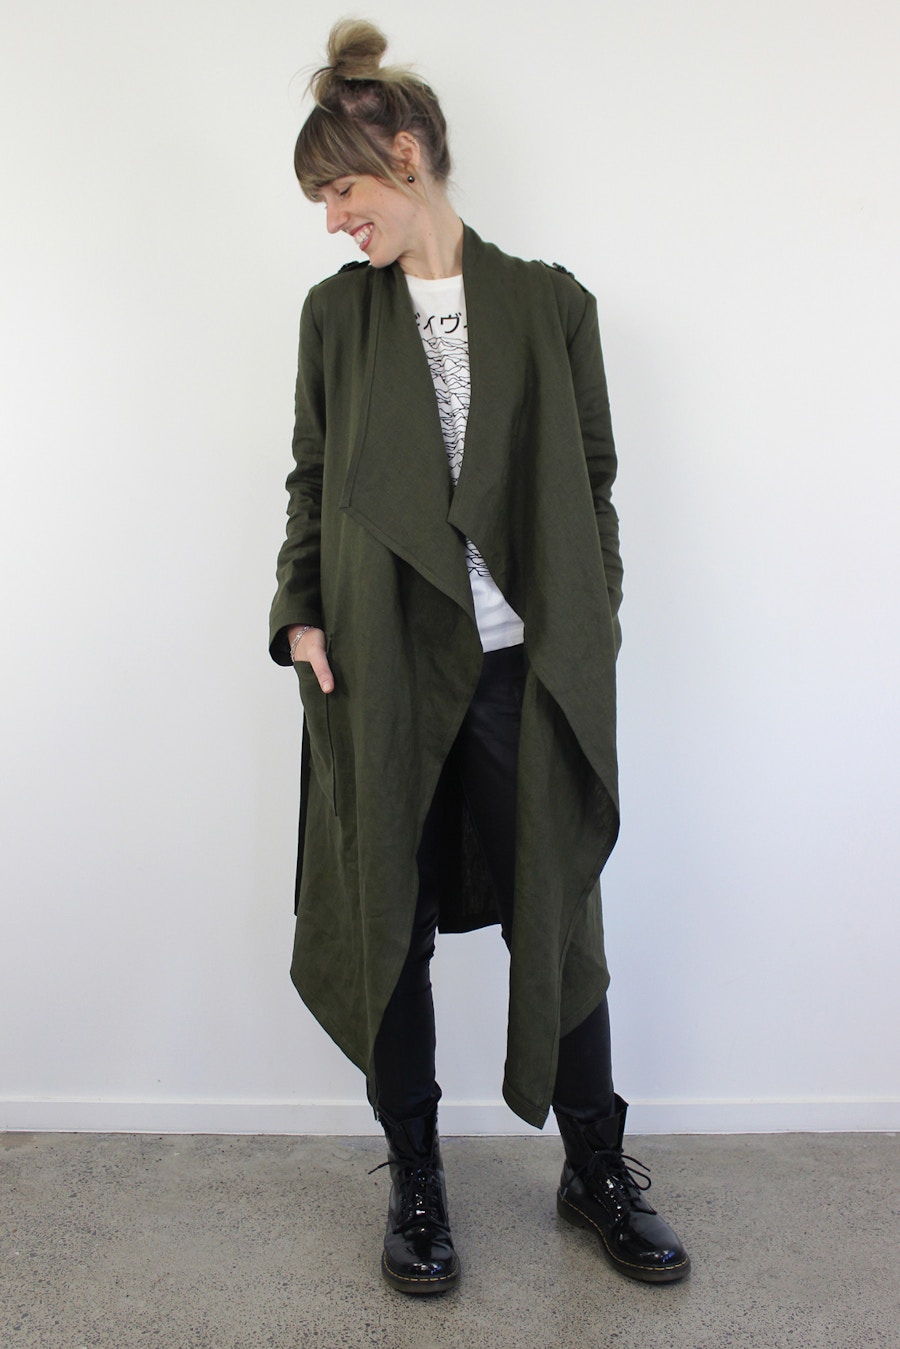 Ulysses Trench Coat Fabric By The Fabric Store Buy Fabric Online